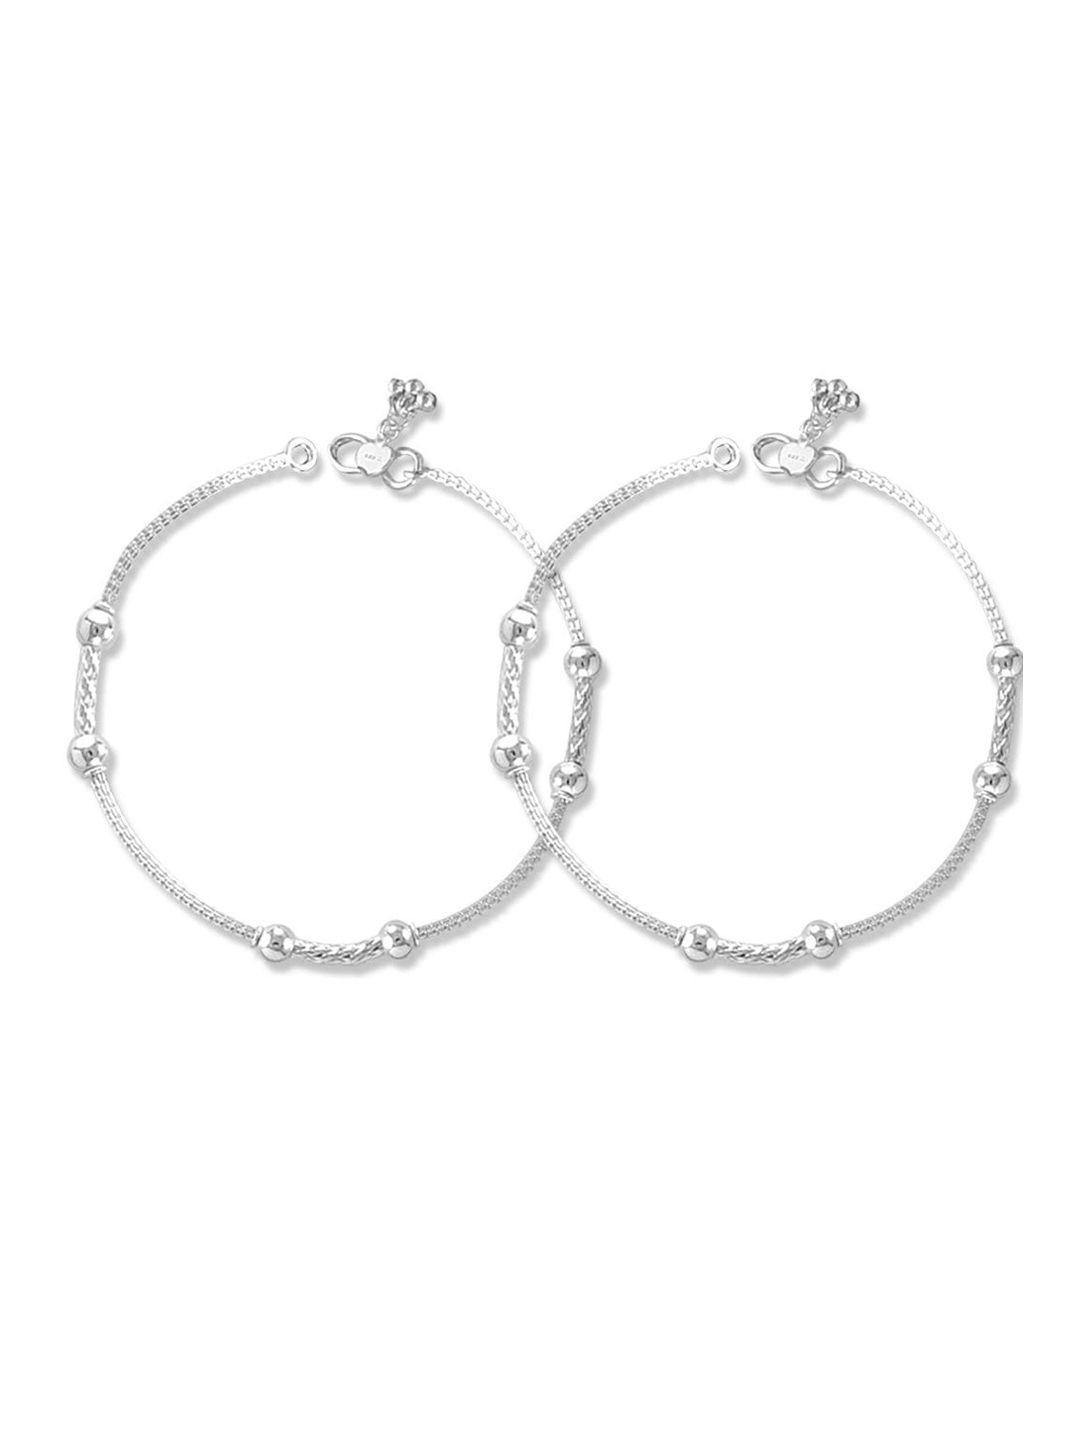 LeCalla Set of 2 925 Sterling Silver BIS Hallmarked Rhodium-Plated Anklet